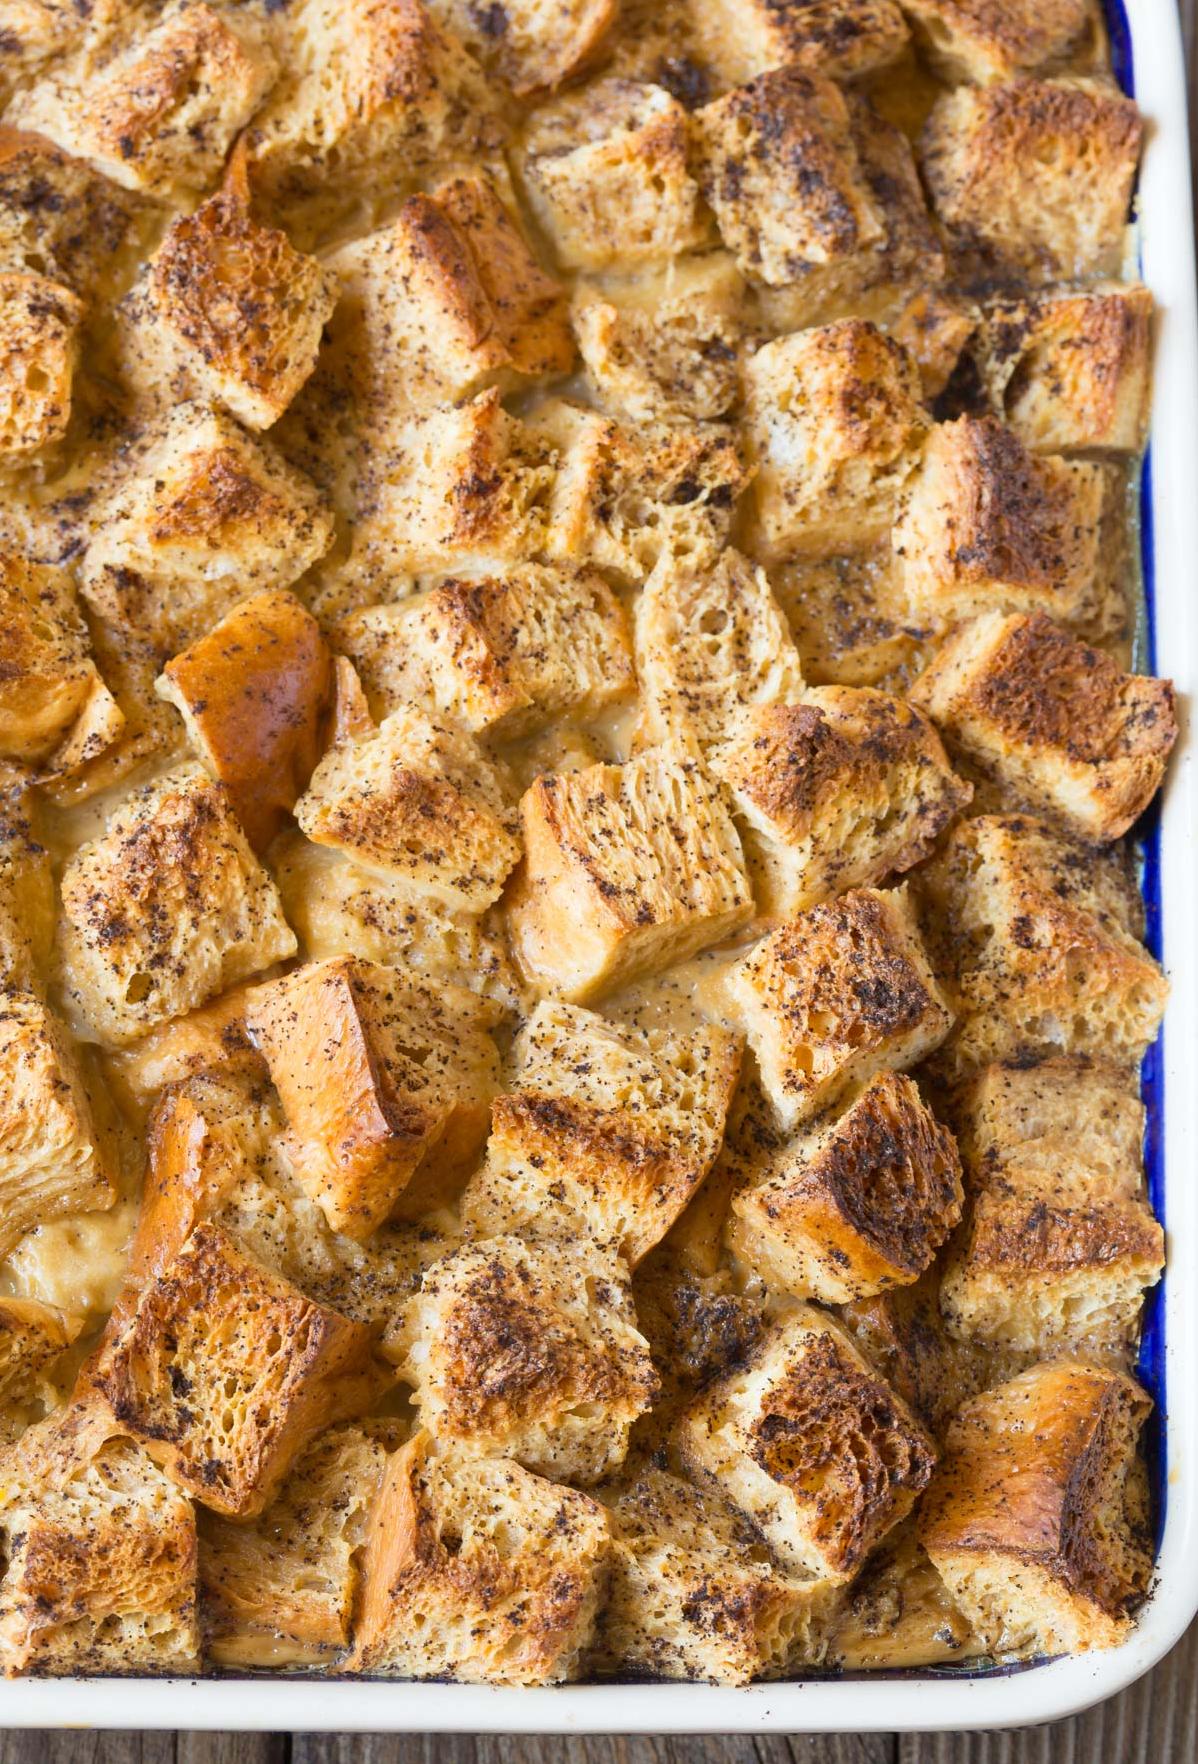  This bread pudding is loaded with rich, aromatic flavors.